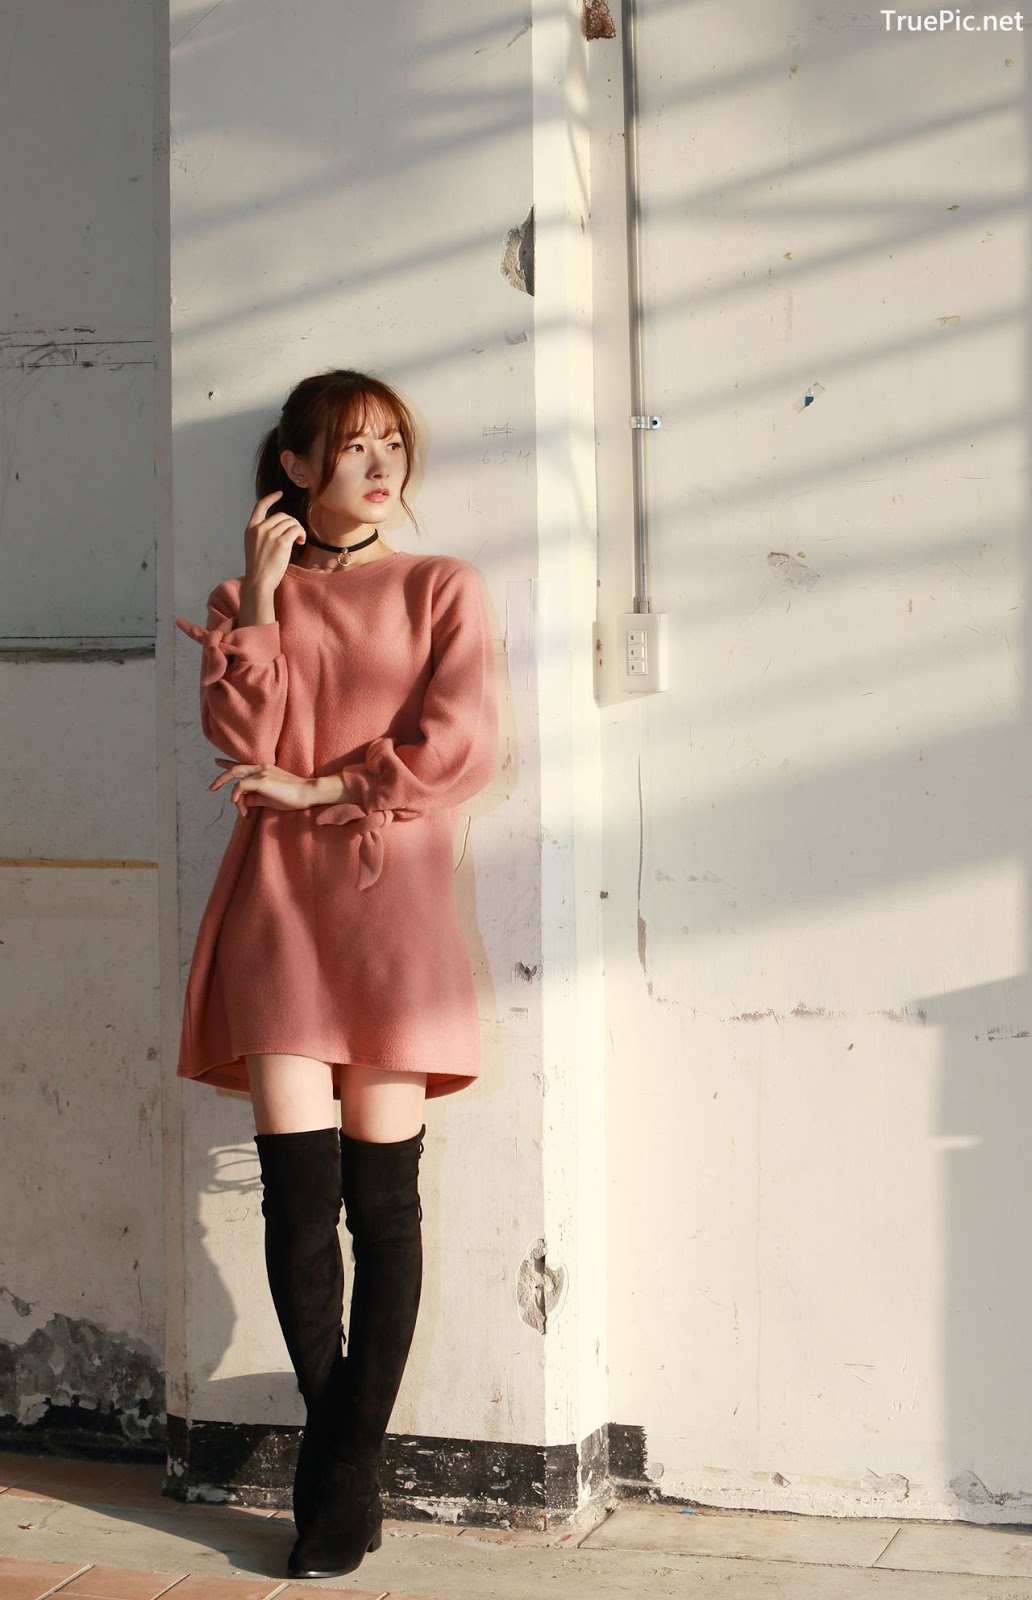 Image-Taiwanese-Model-郭思敏-Pure-And-Gorgeous-Girl-In-Pink-Sweater-Dress-TruePic.net- Picture-24